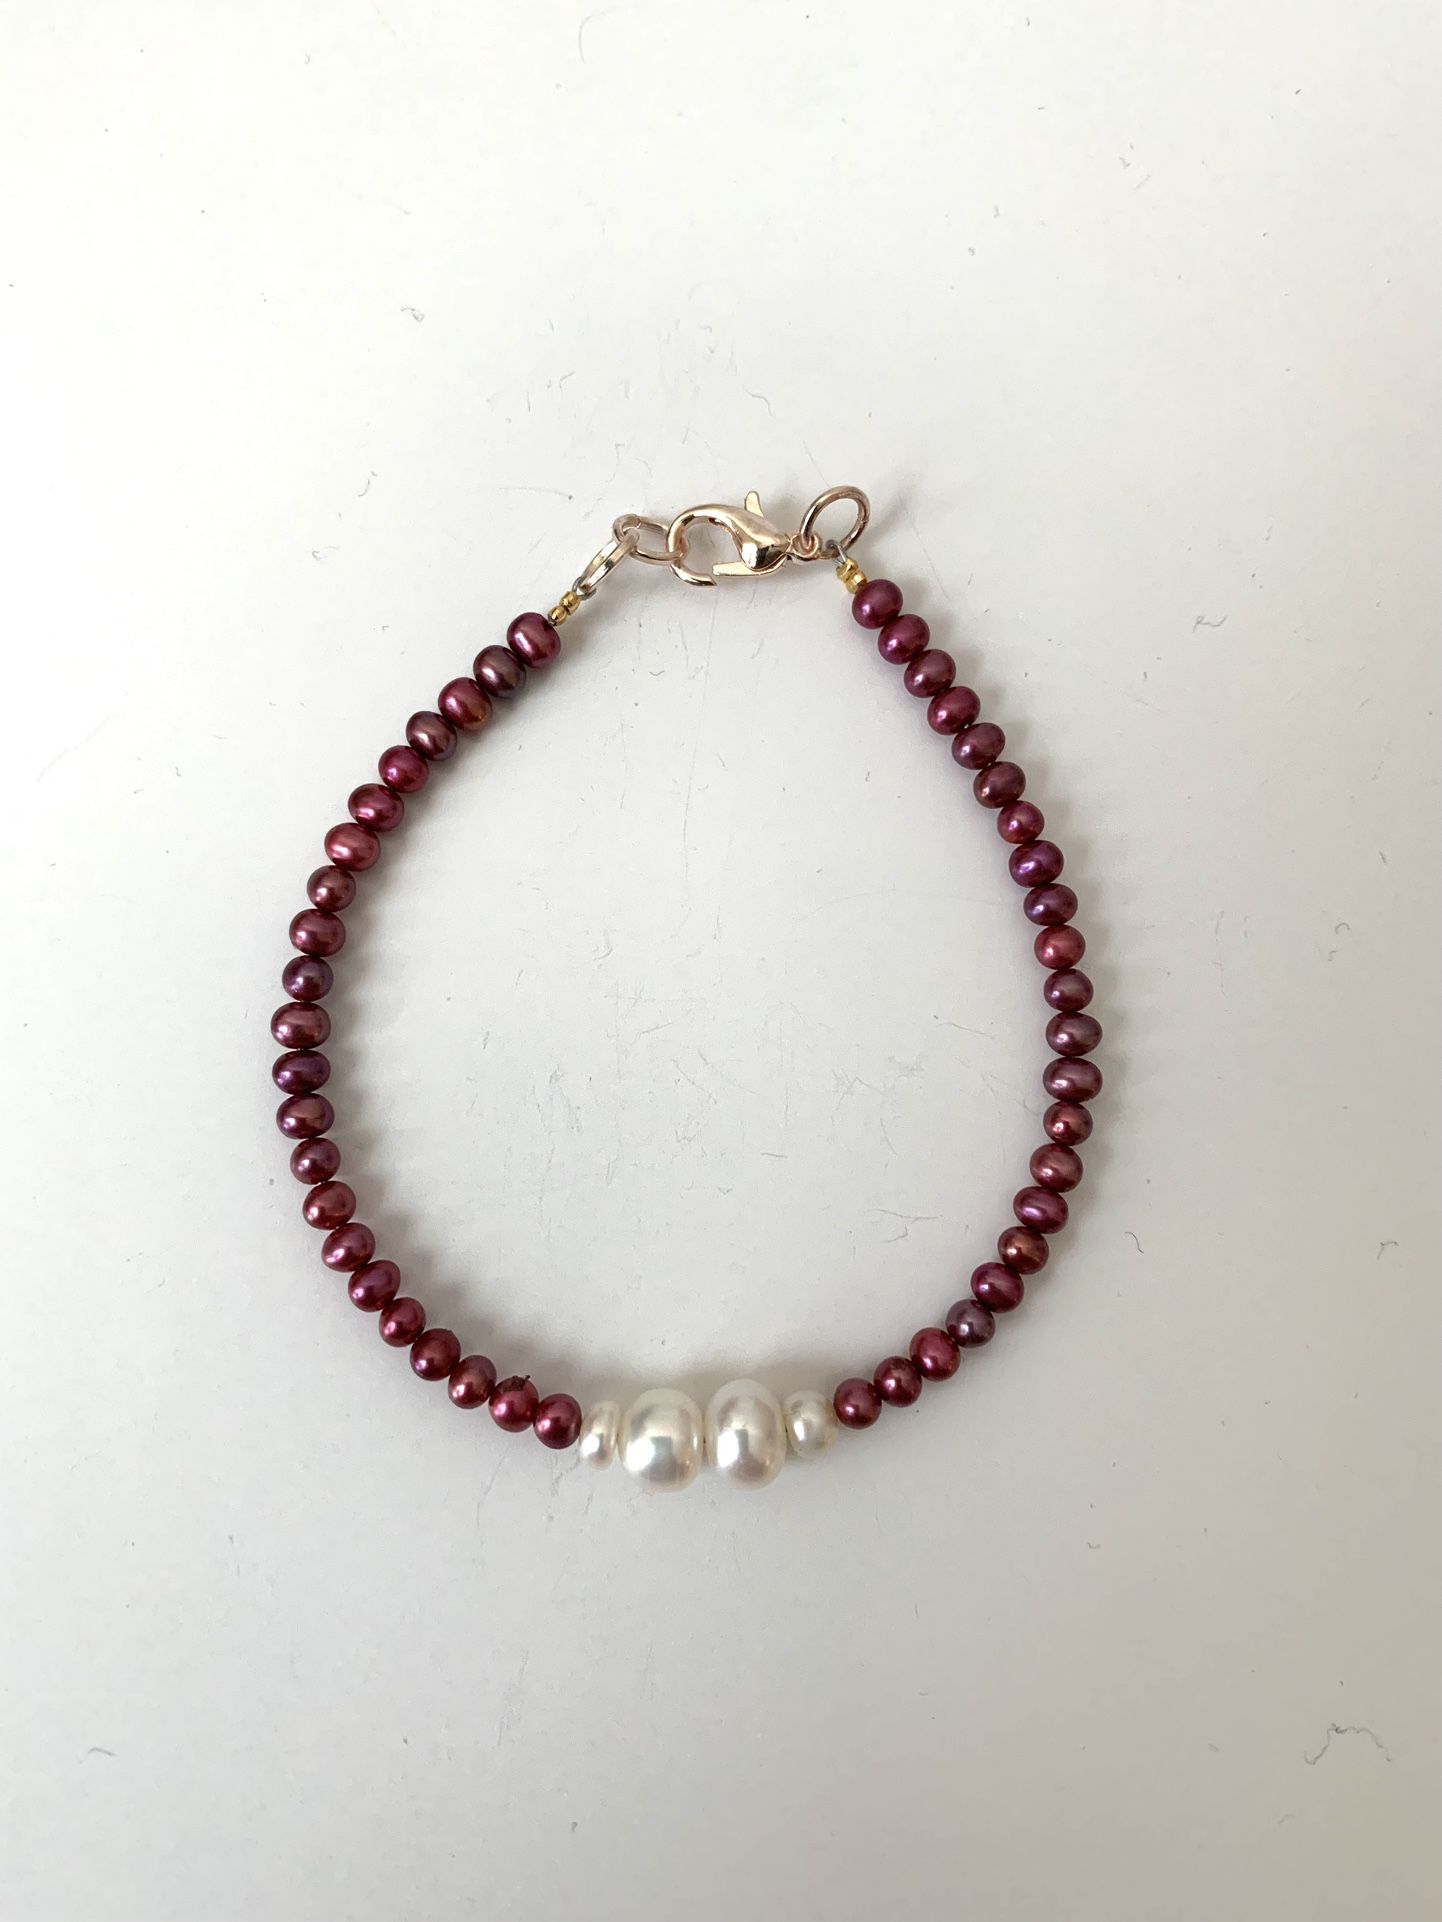 *New Handmade* Genuine Cultured Pearl Bracelet, Vivid Red And White, 7.5”